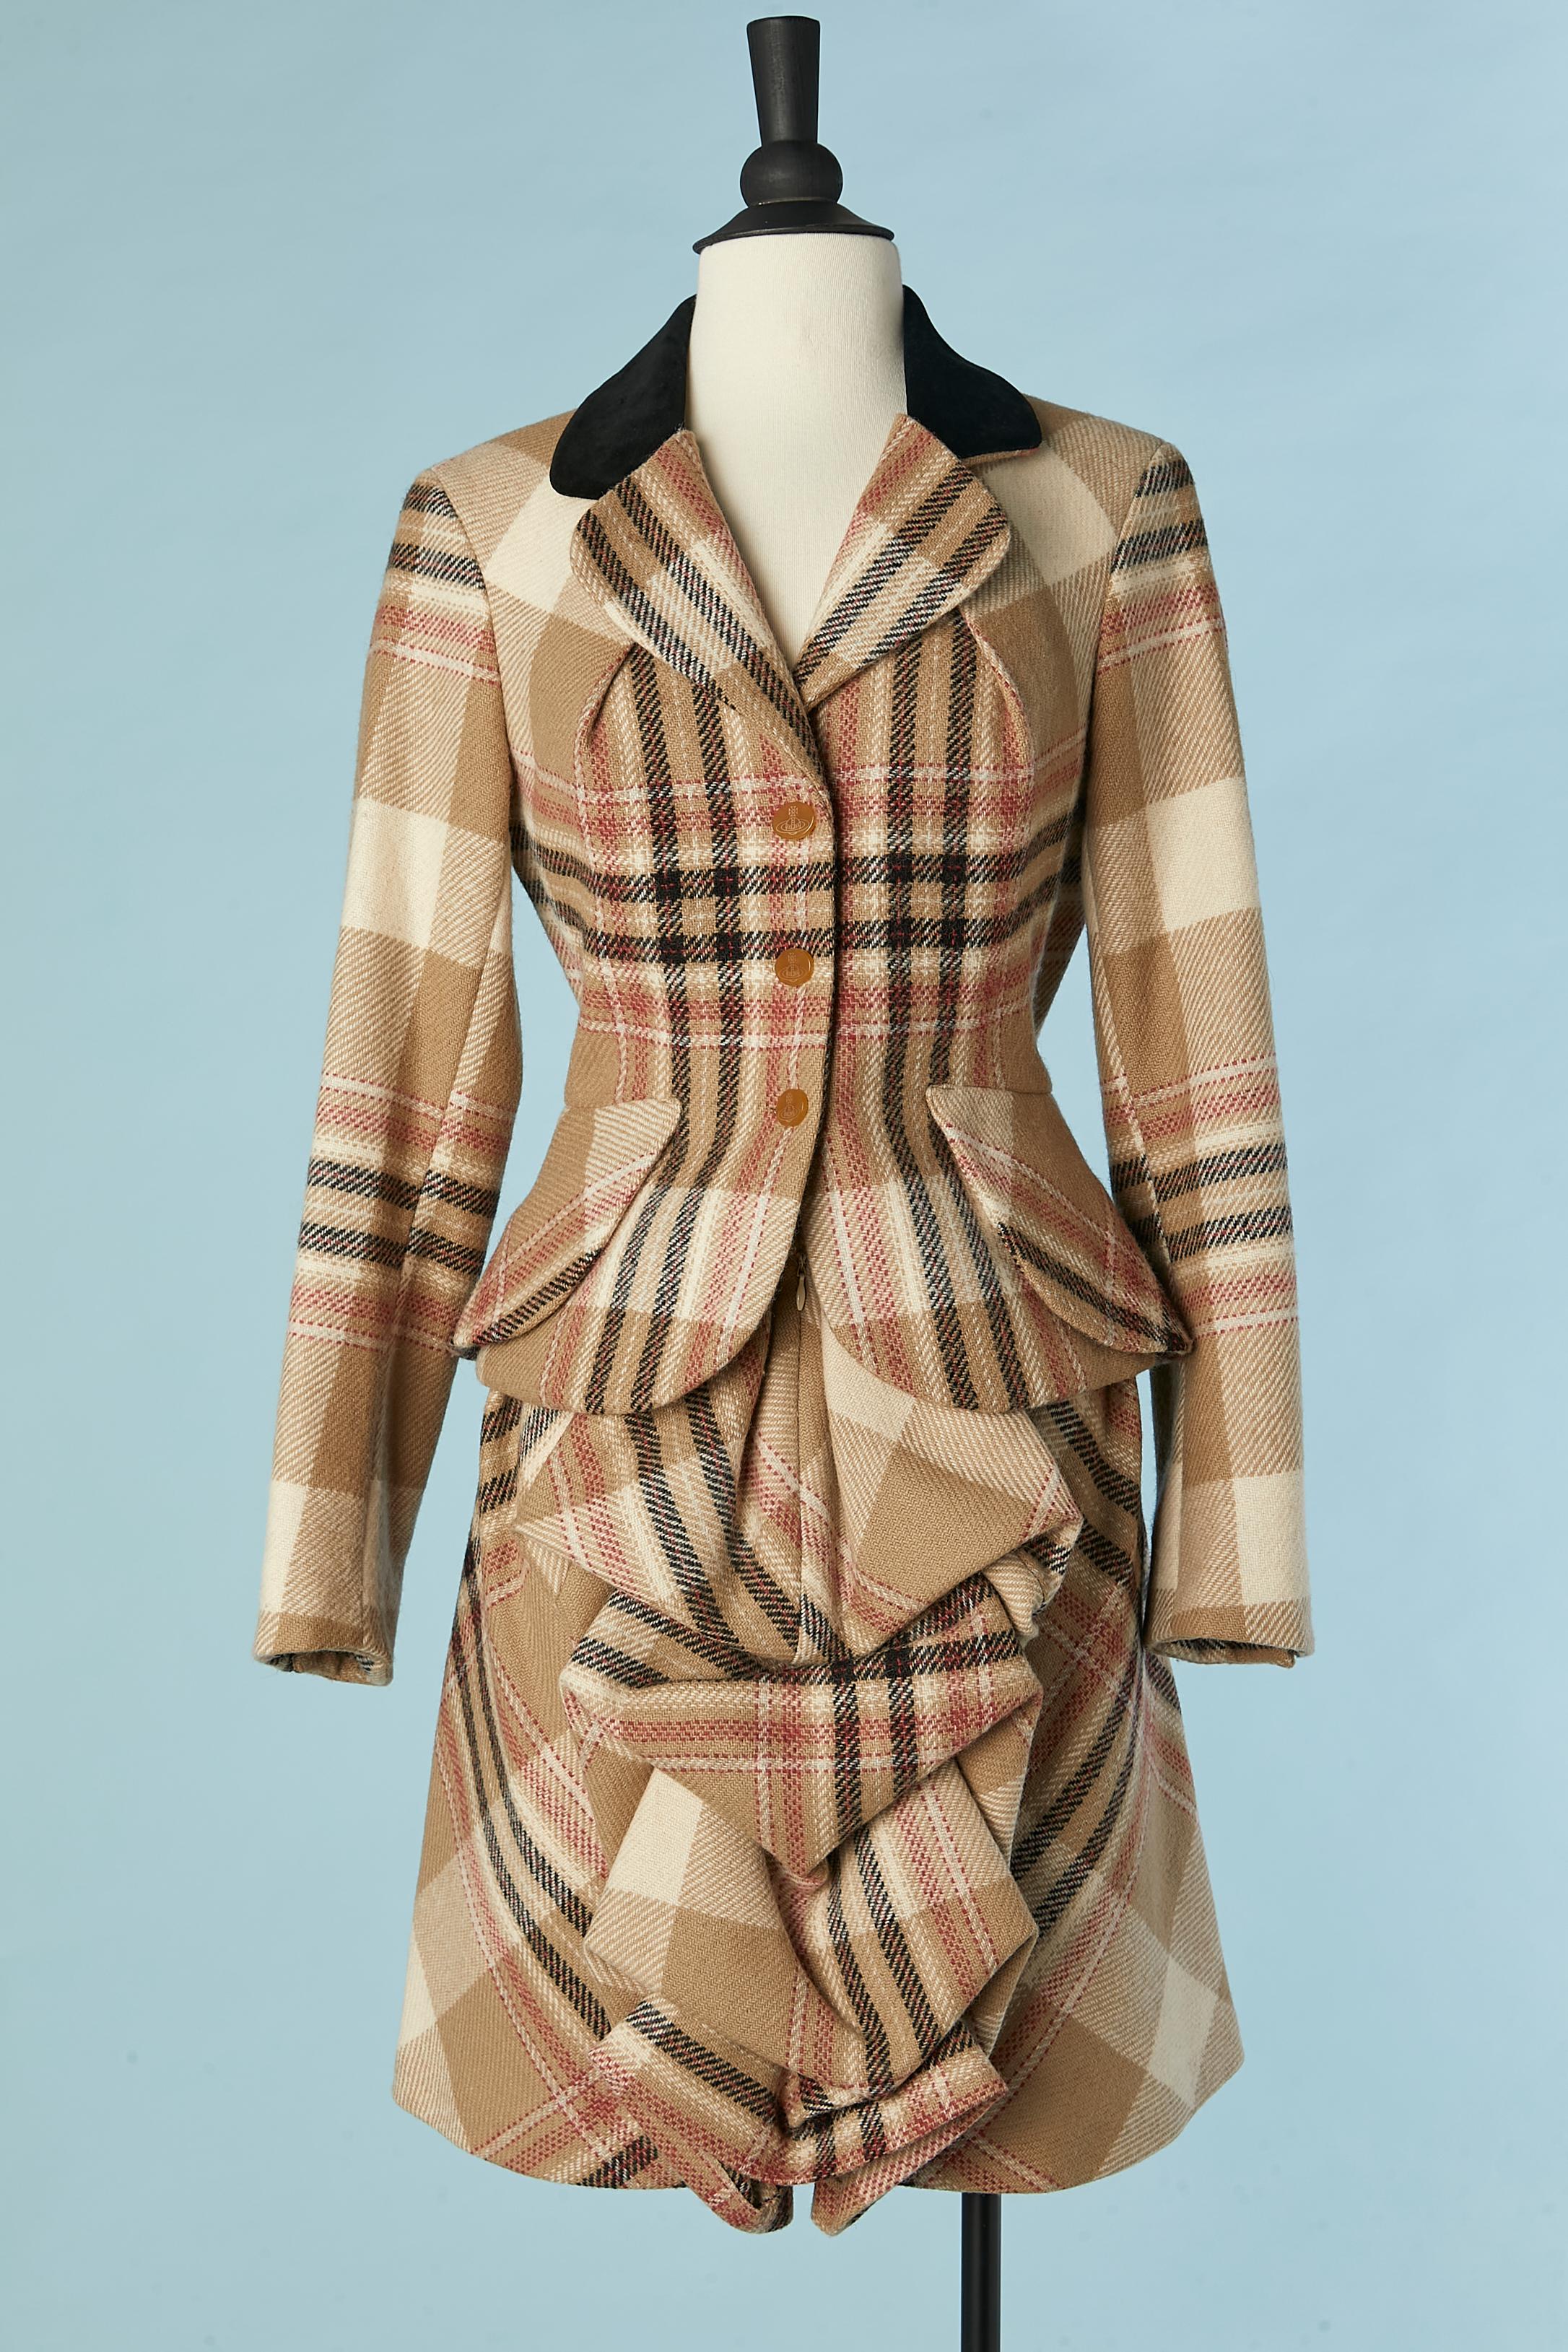 Iconic Tartan skirt-suit with 